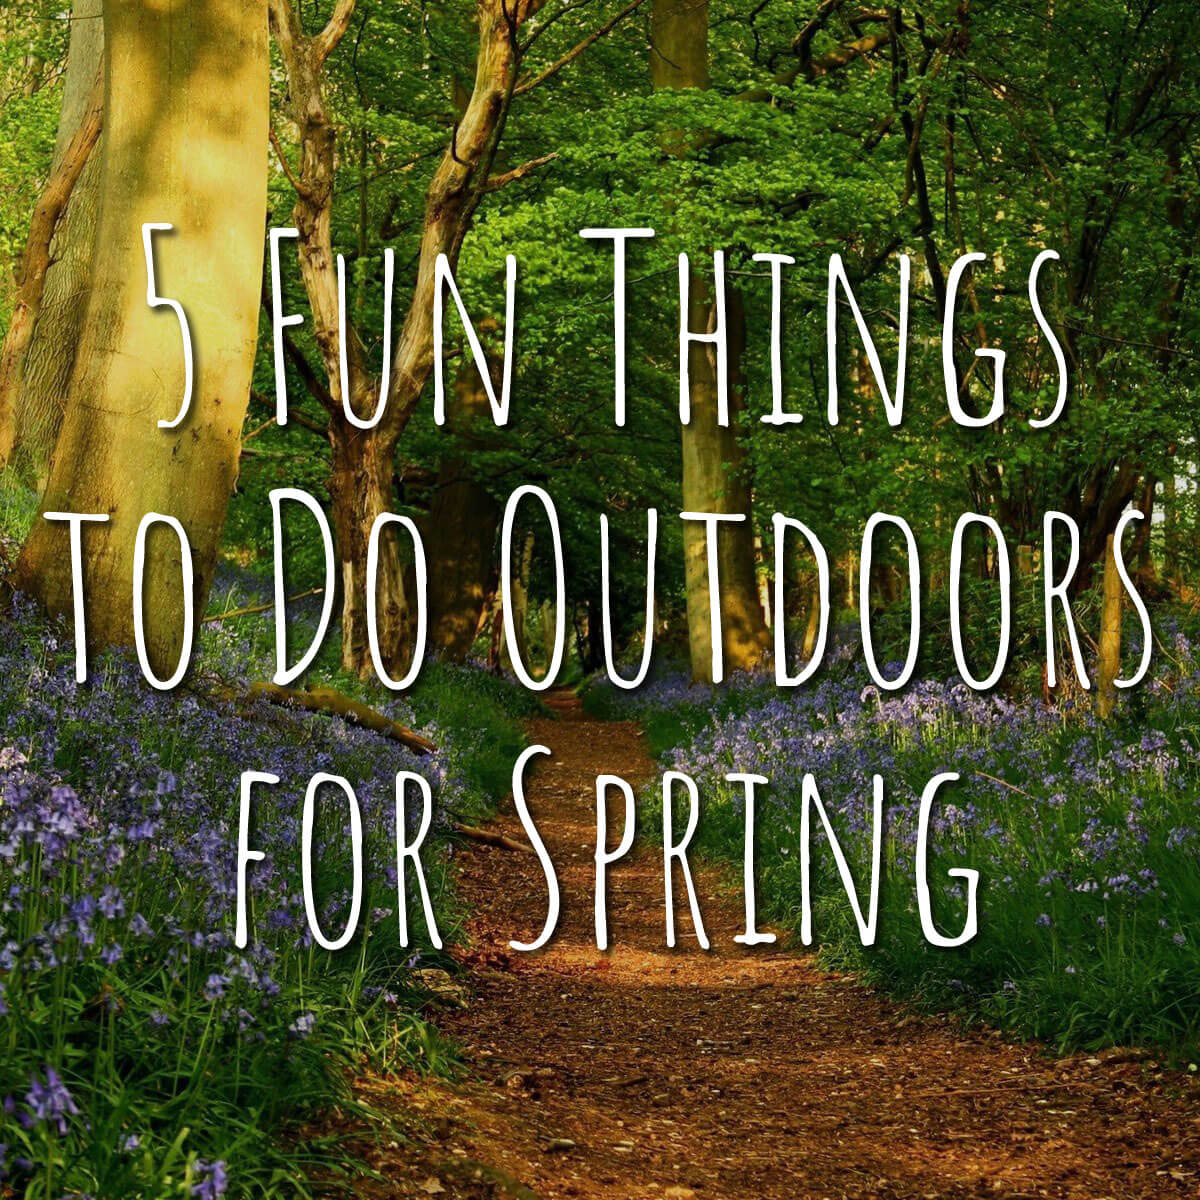 5 Fun Things to Do Outdoors for Spring